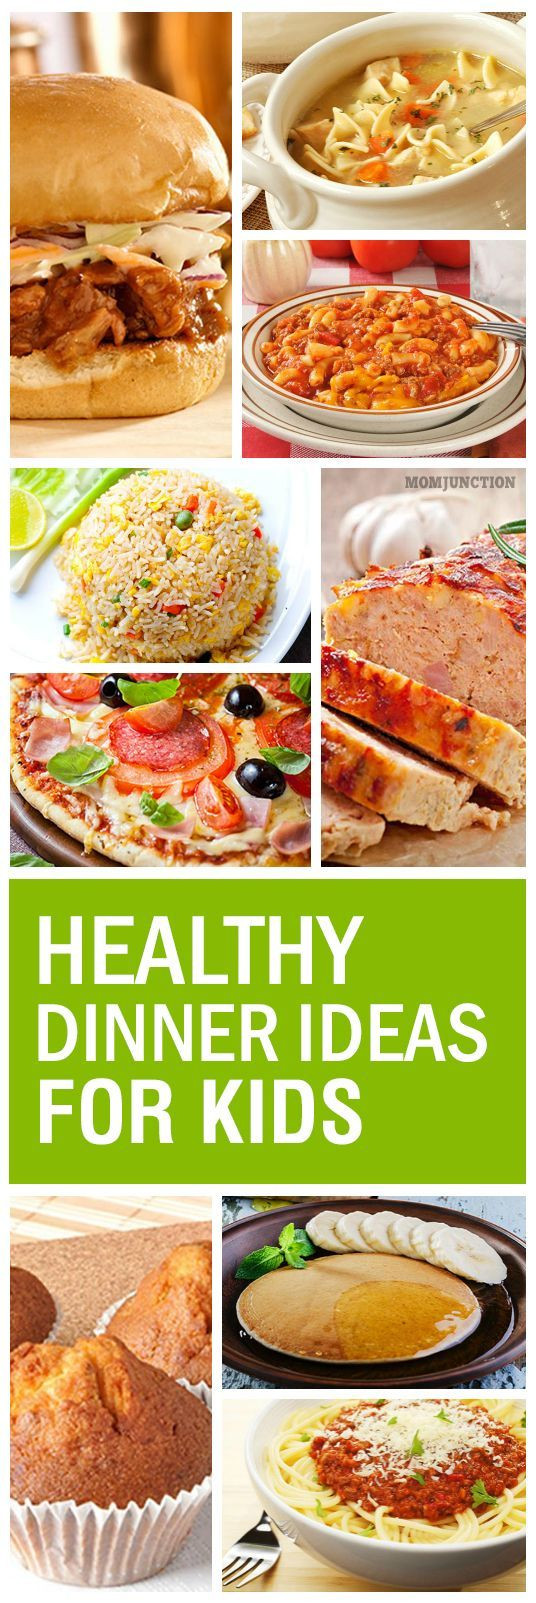 Quick Meals For Dinner
 15 Quick And Yummy Dinner Recipes For Kids